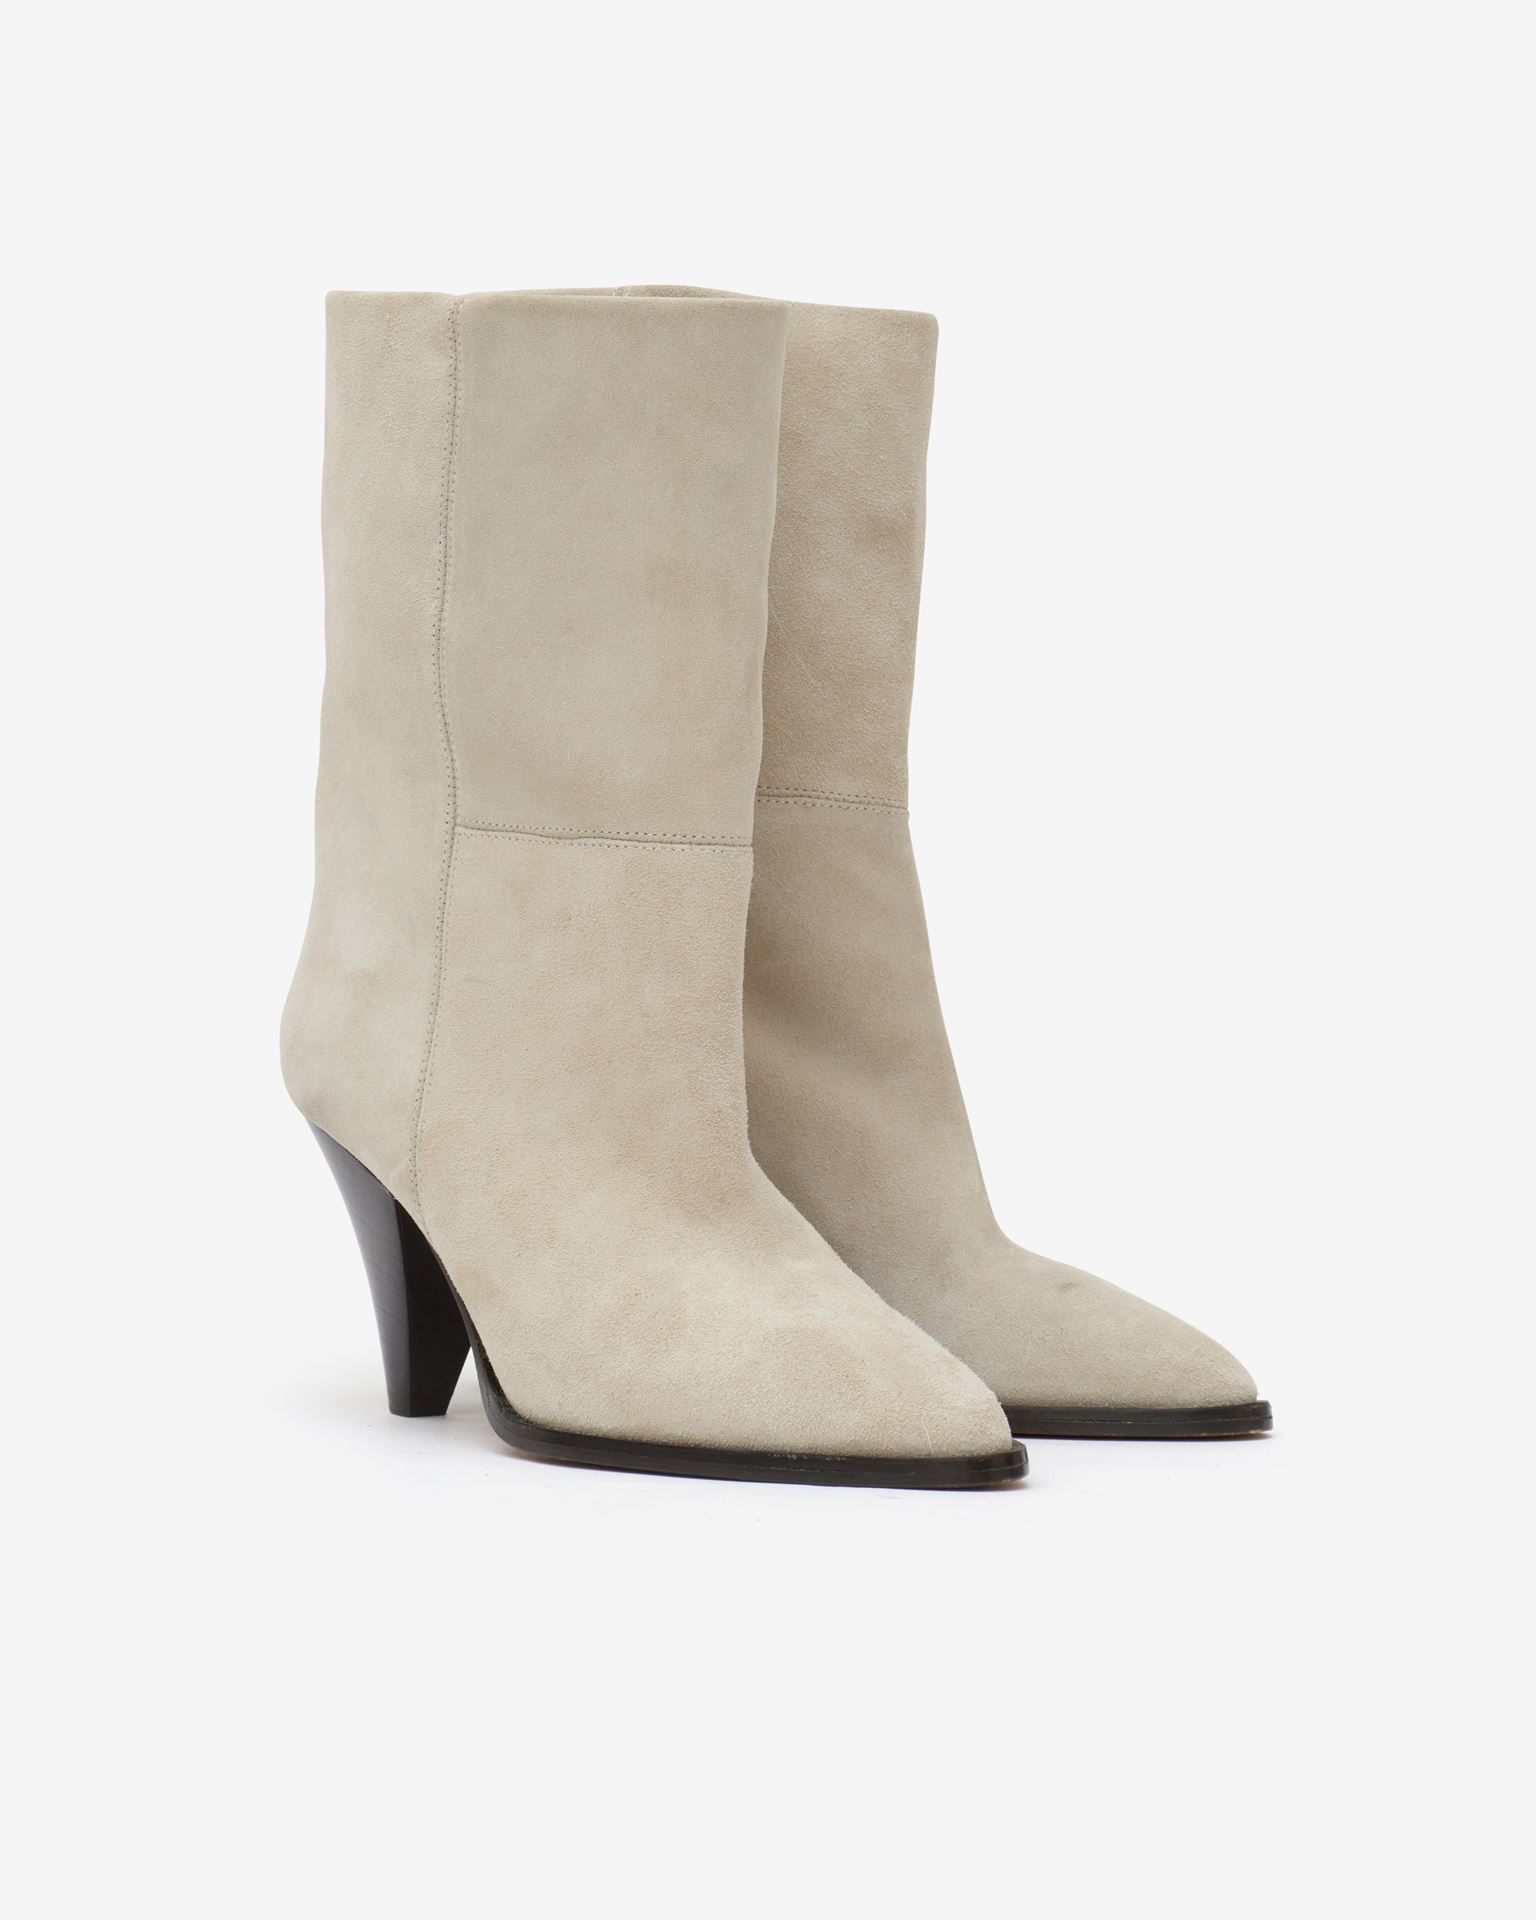 Isabel Marant, Rouxa Suede Leather Low Boots - Women - White